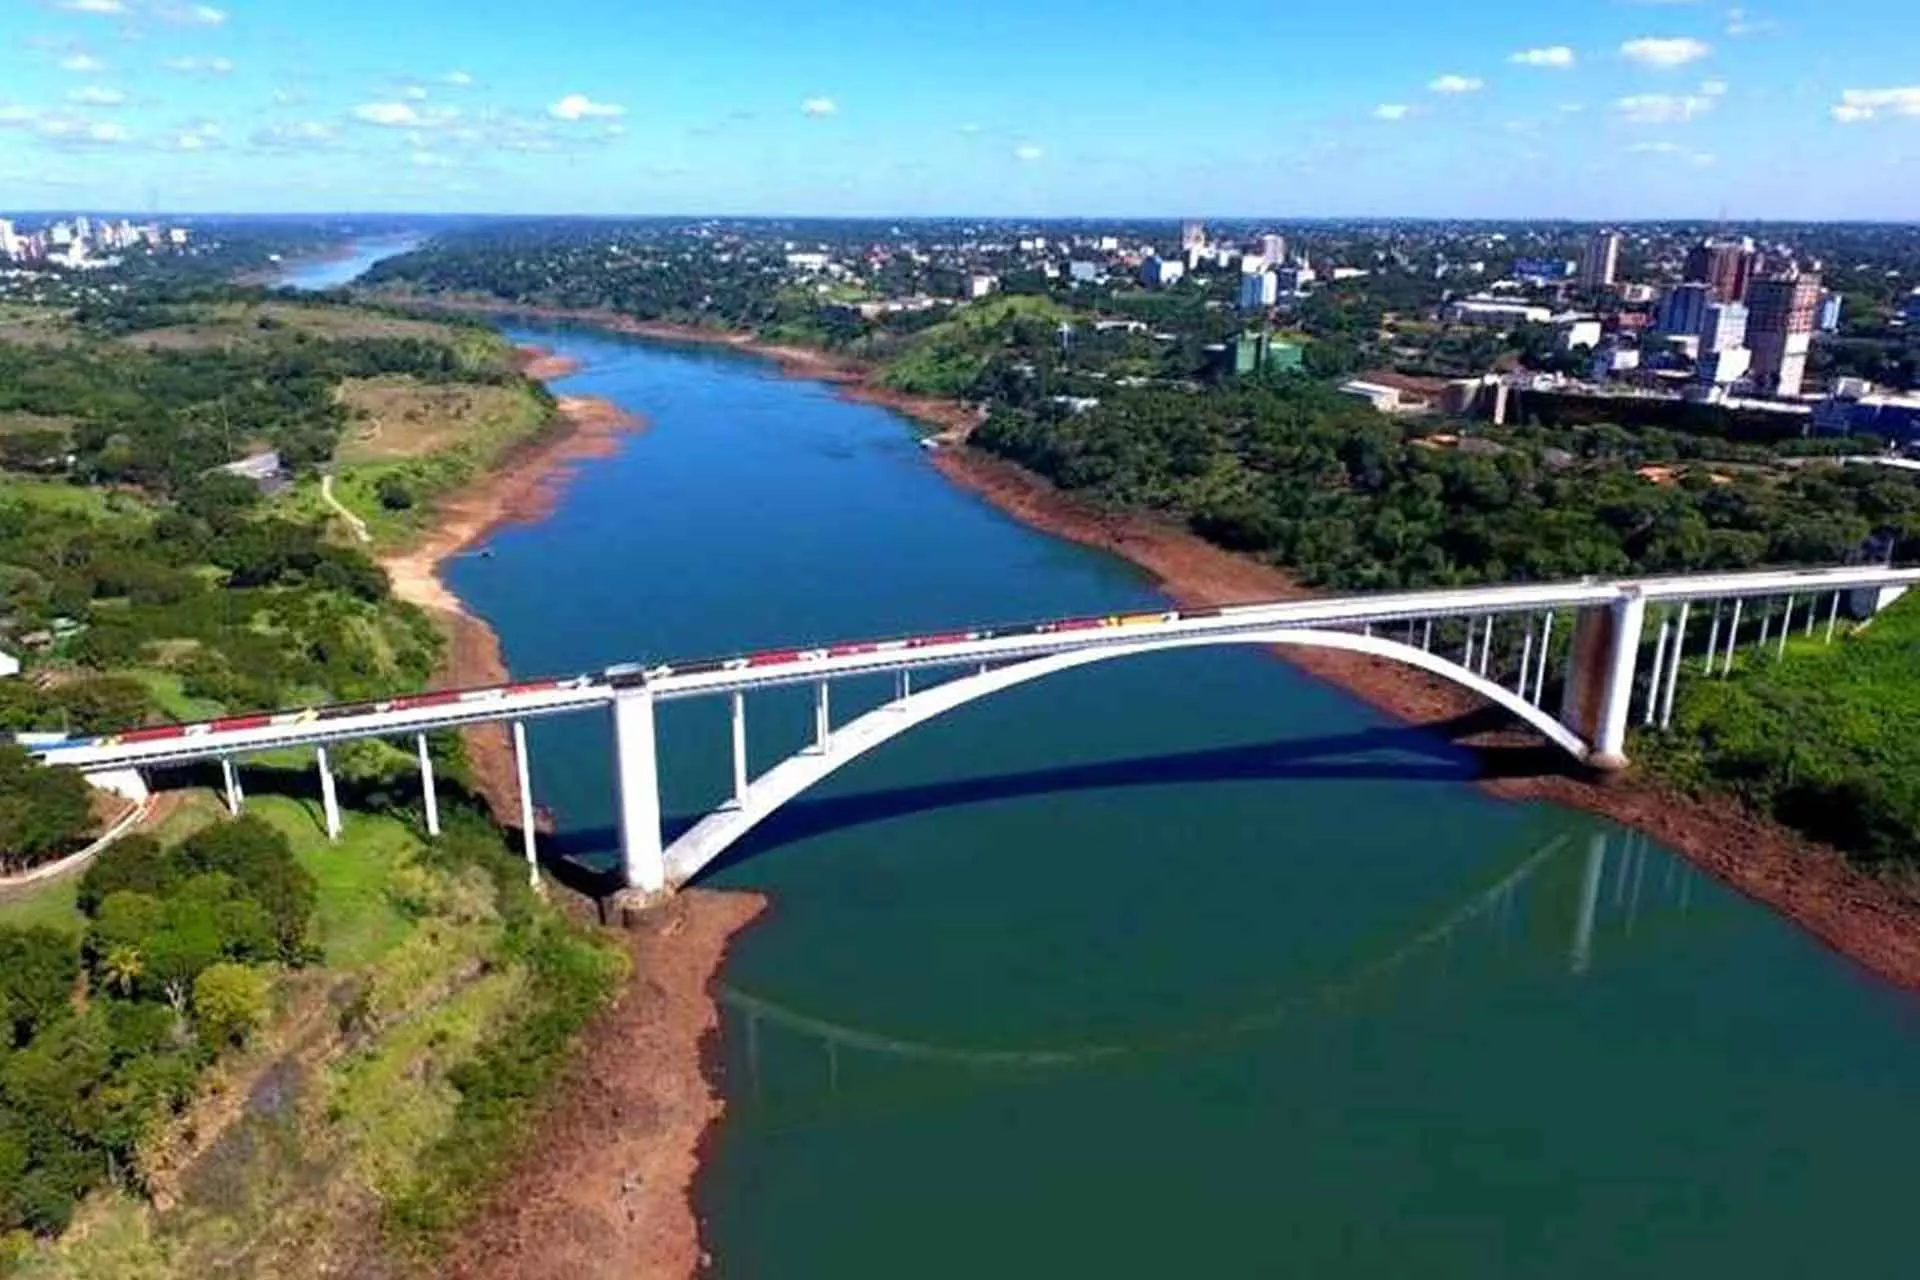 Bridge of Friendship in Paraguay, South America | Architecture - Rated 3.3